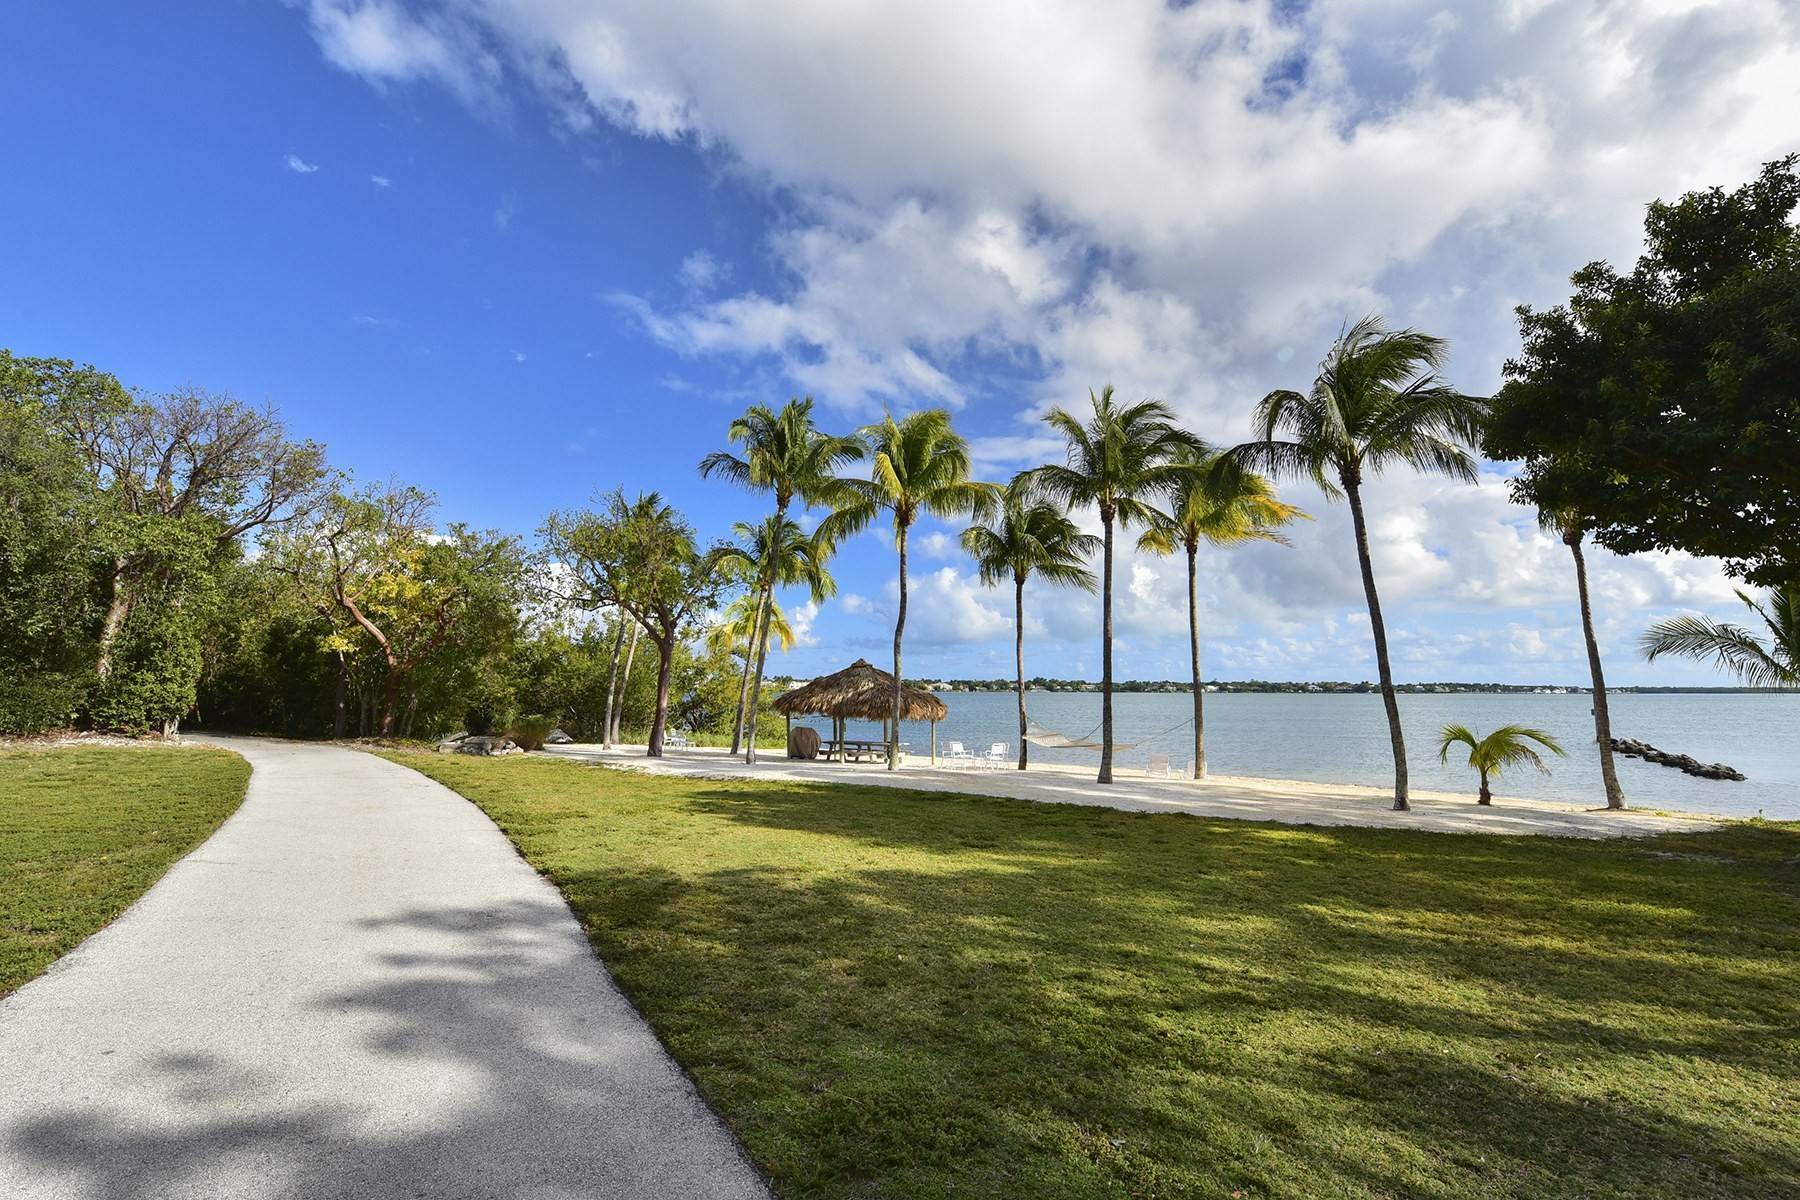 9. Property for Sale at Pumpkin Key - Private Island, Key Largo, FL Pumpkin Key - Private Island Key Largo, Florida 33037 United States